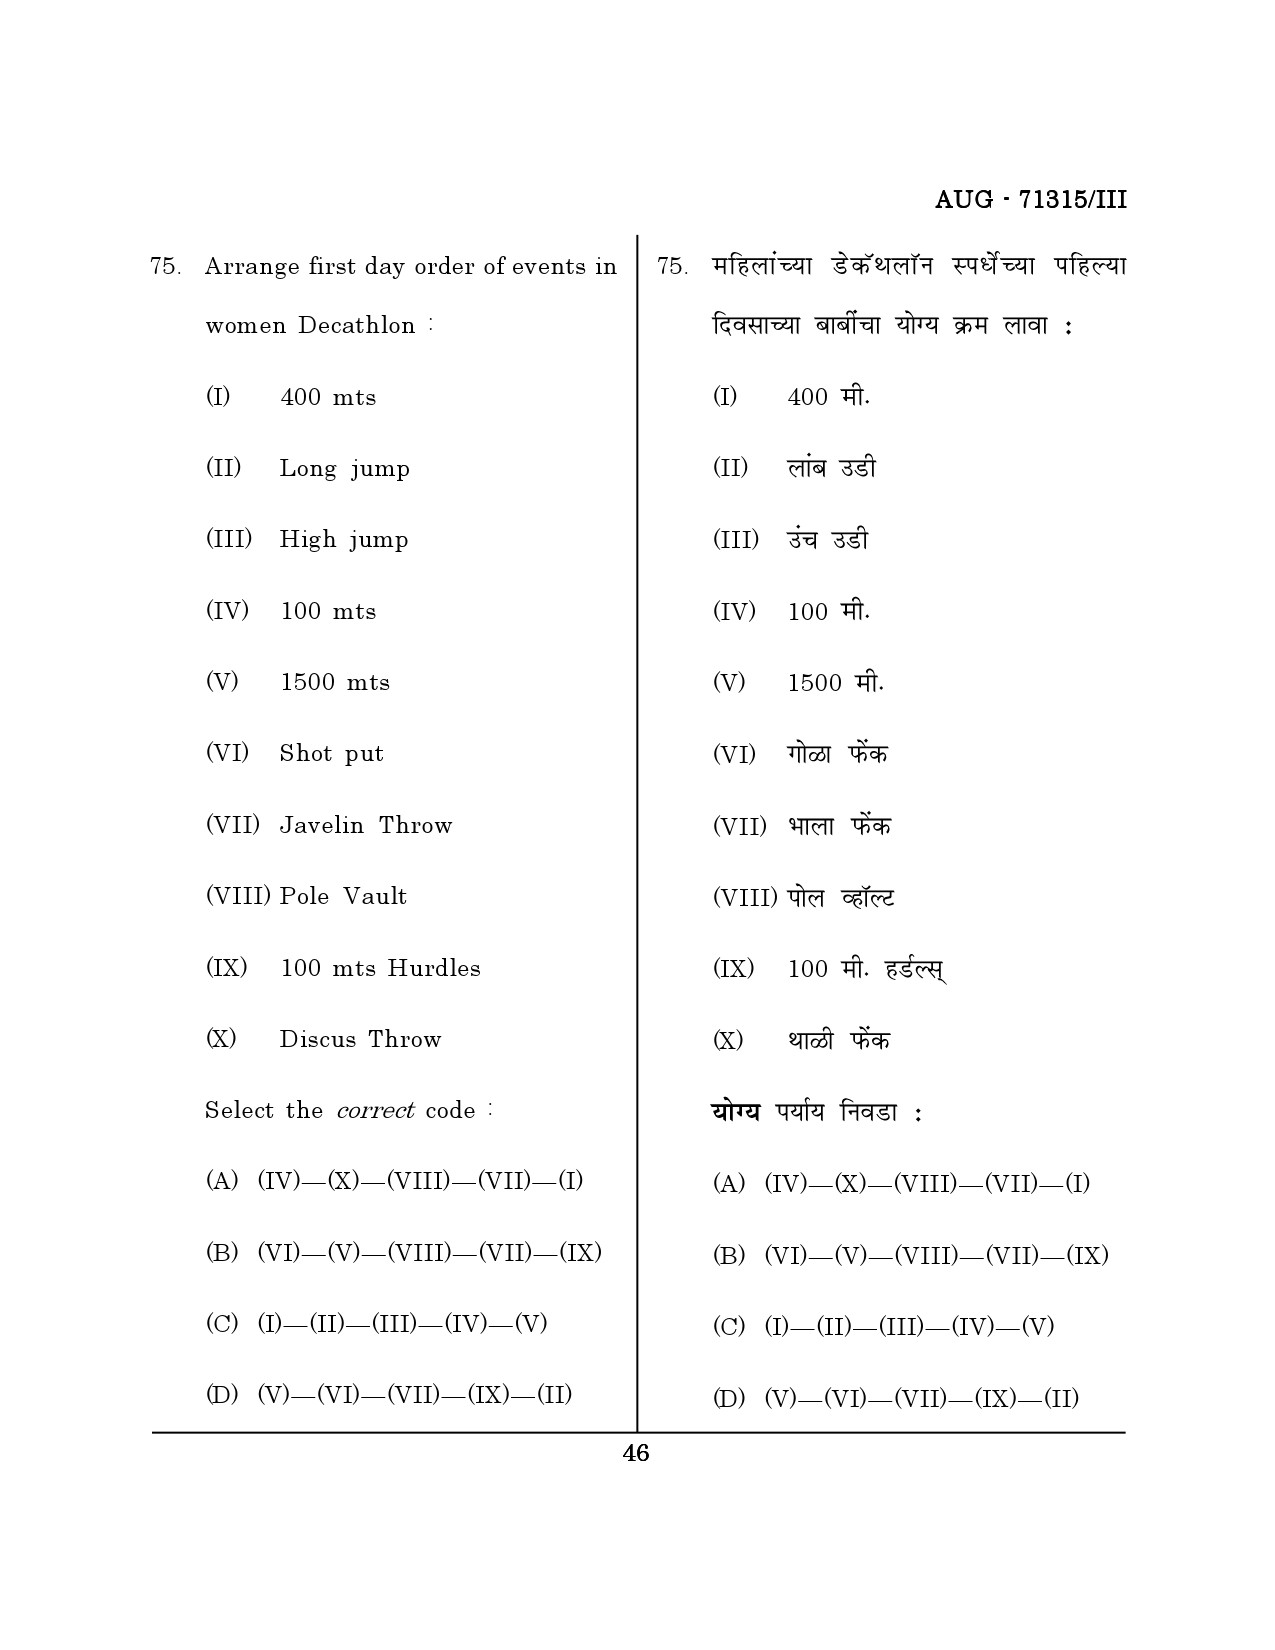 Maharashtra SET Physical Education Question Paper III August 2015 45